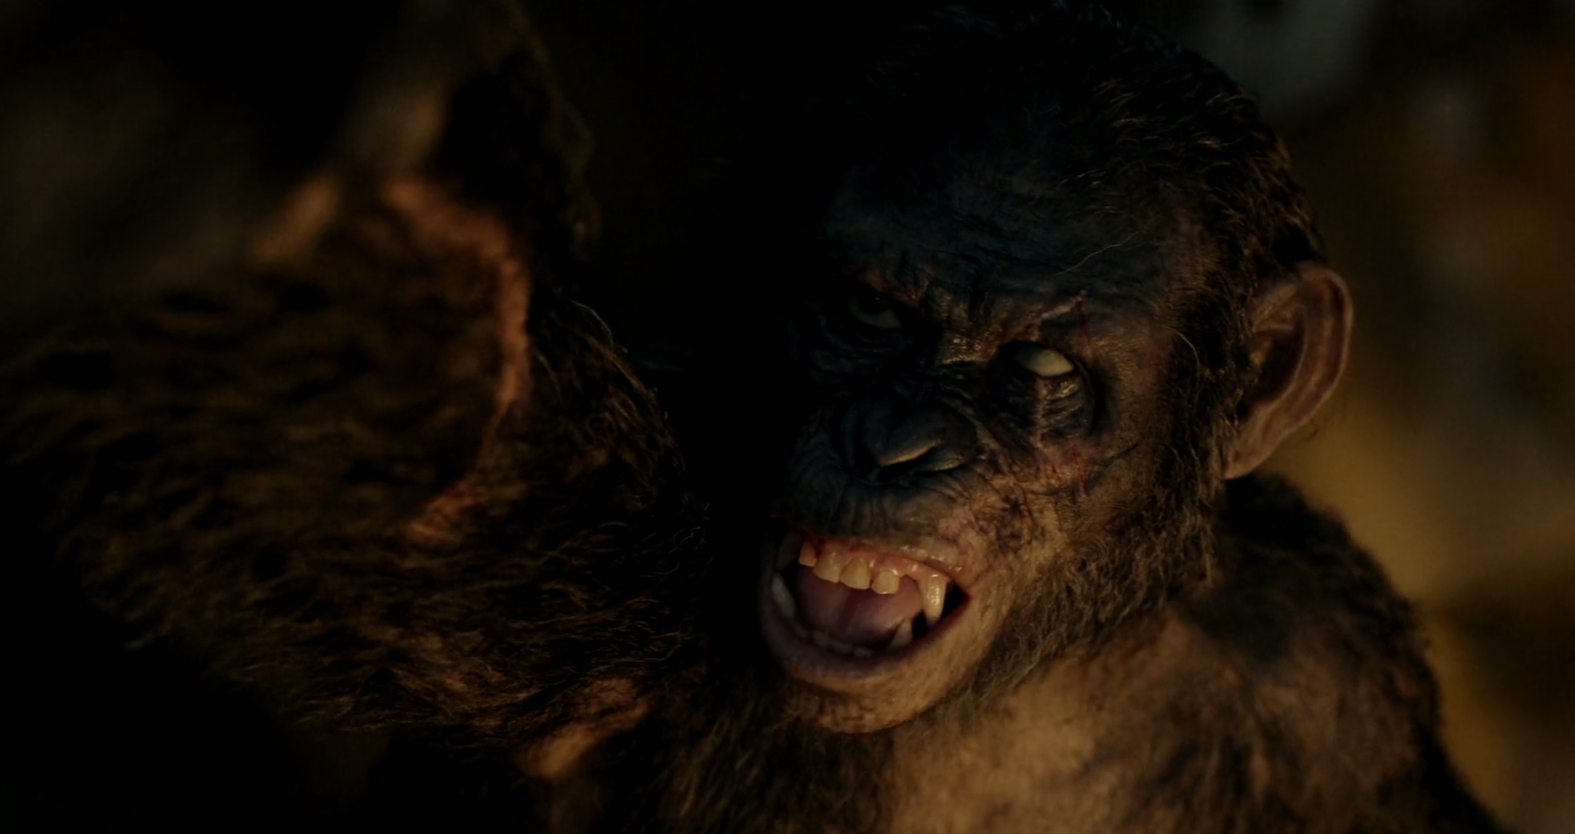 Dawn of the Planet of the Apes Movie Review